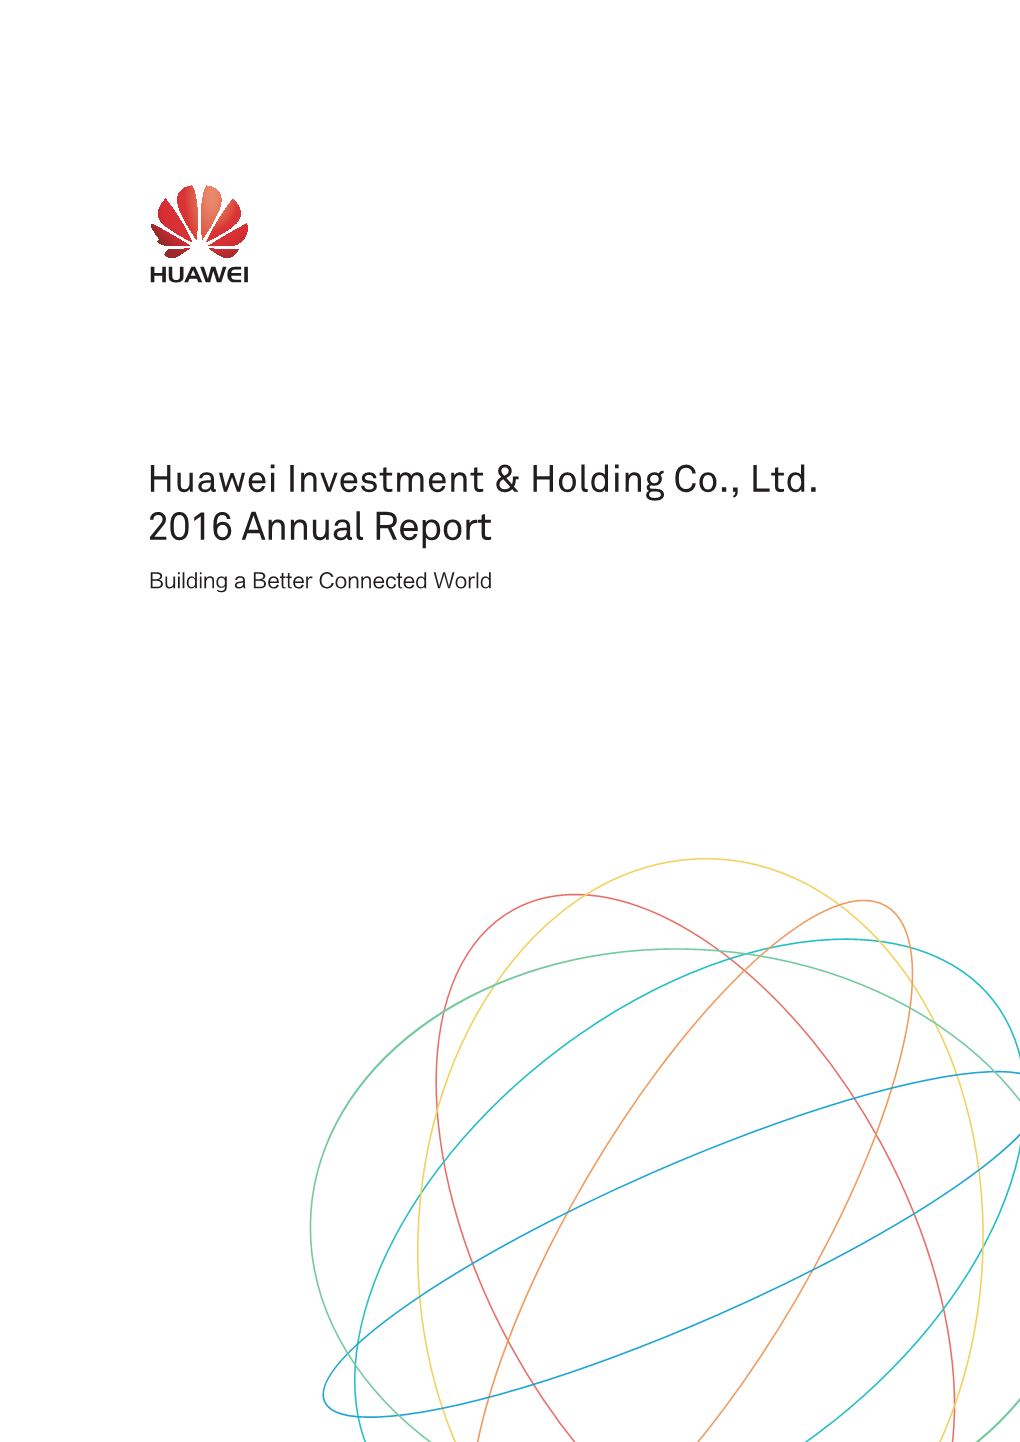 2016 Annual Report Who Is Huawei? Industry Ecosystem